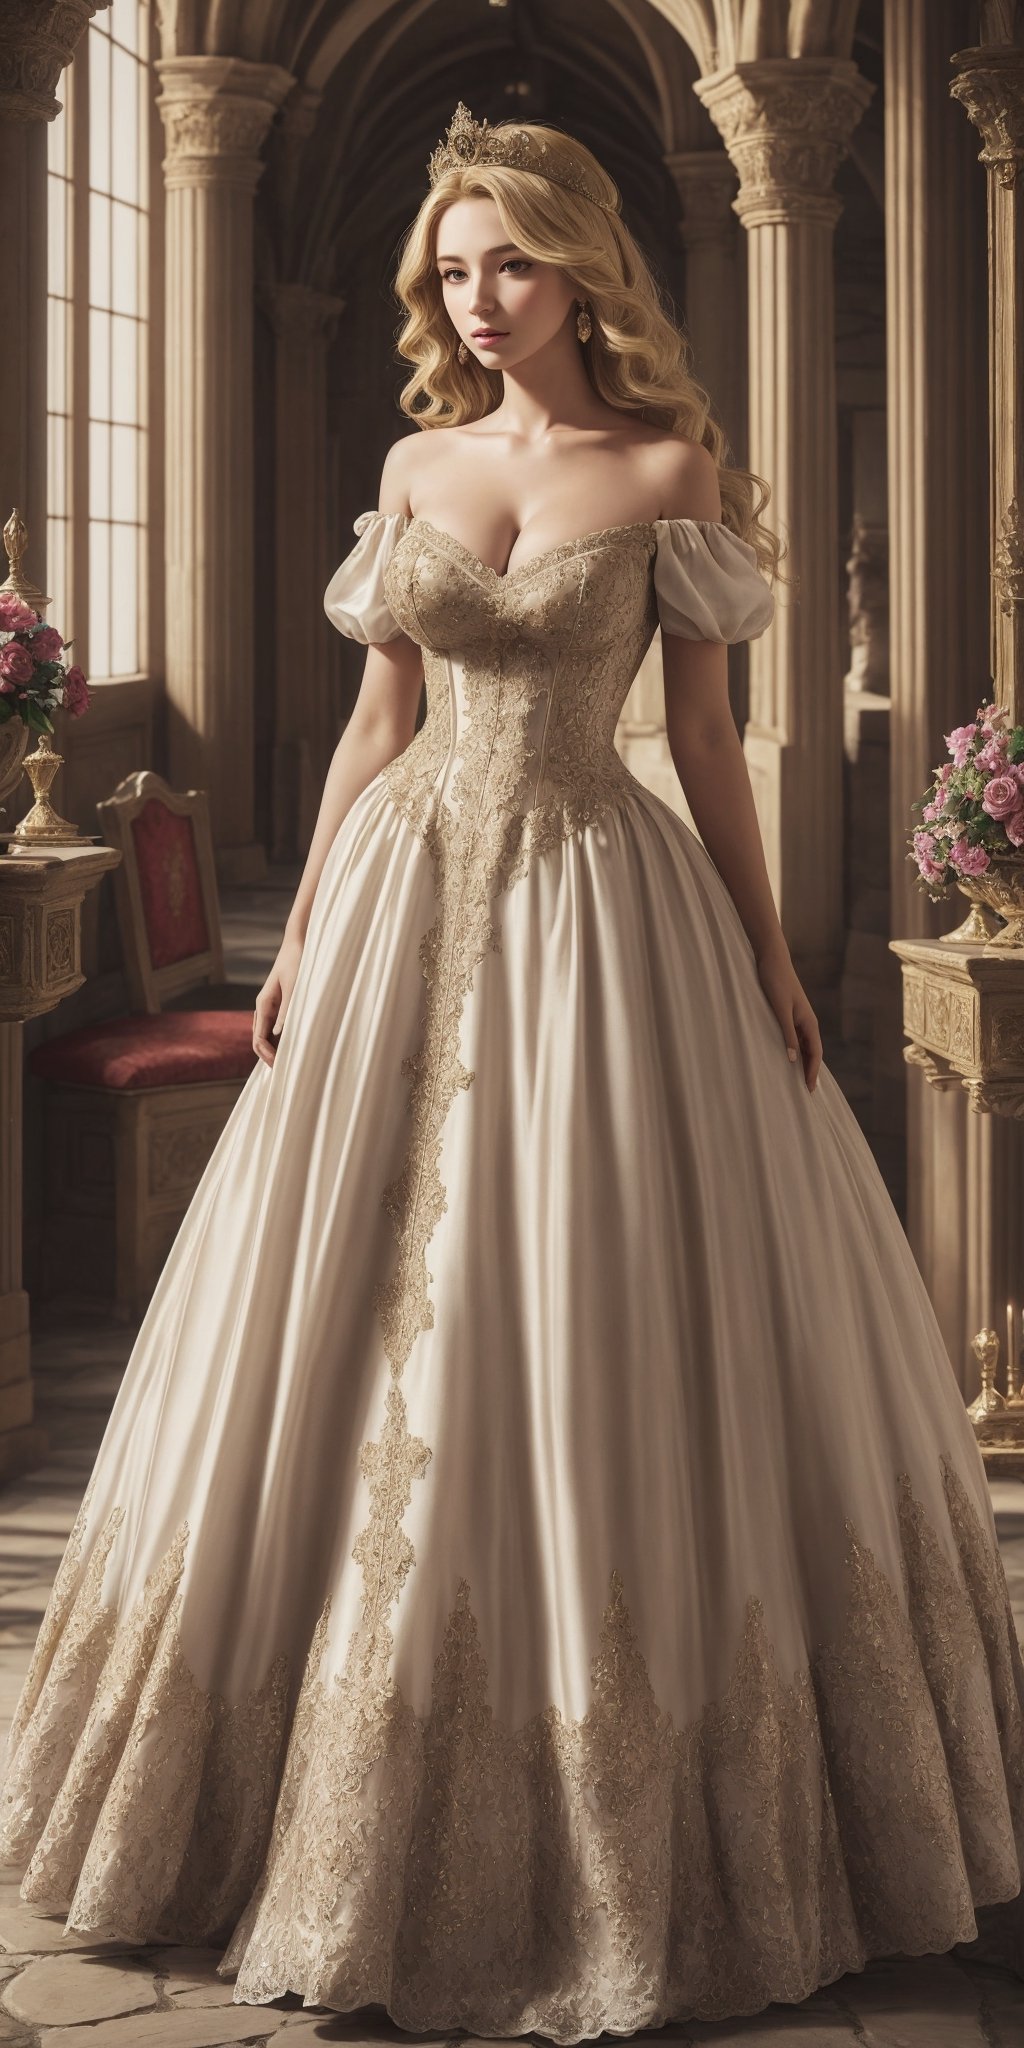 1 girl, half body shot, beautiful 18 y.o. medieval girl, blonde hair:2, long hair:2, photorealistic:1.4, big breasts:2, 16k, medieval dress:2, luxurious fabric, intricate embroidery:1.5, open-shoulder:1.5, posing inside a medieval castle, intricate:2, ardent:1.3, gentle:1.3, noble:1.4, regal:1.4, medieval:2, dynamic pose:2,More Detail,princess dress,renaissance girl